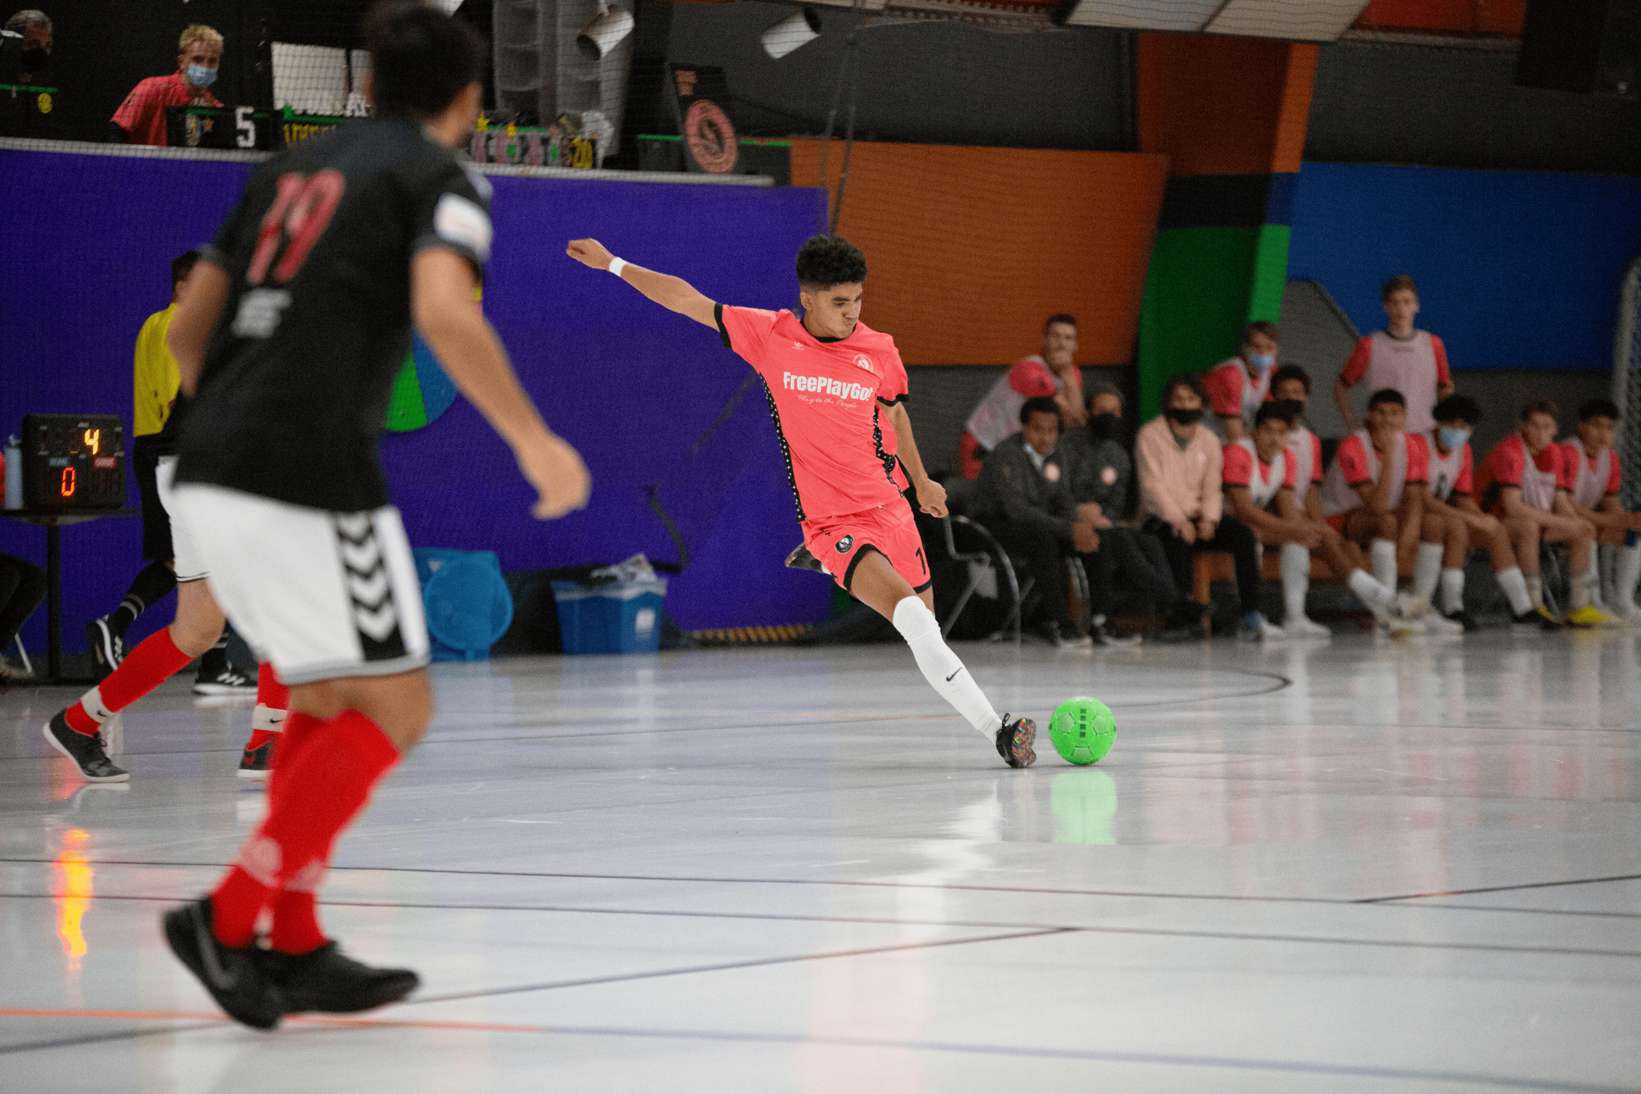 The NFPL striving to become the best futsal league in the United States